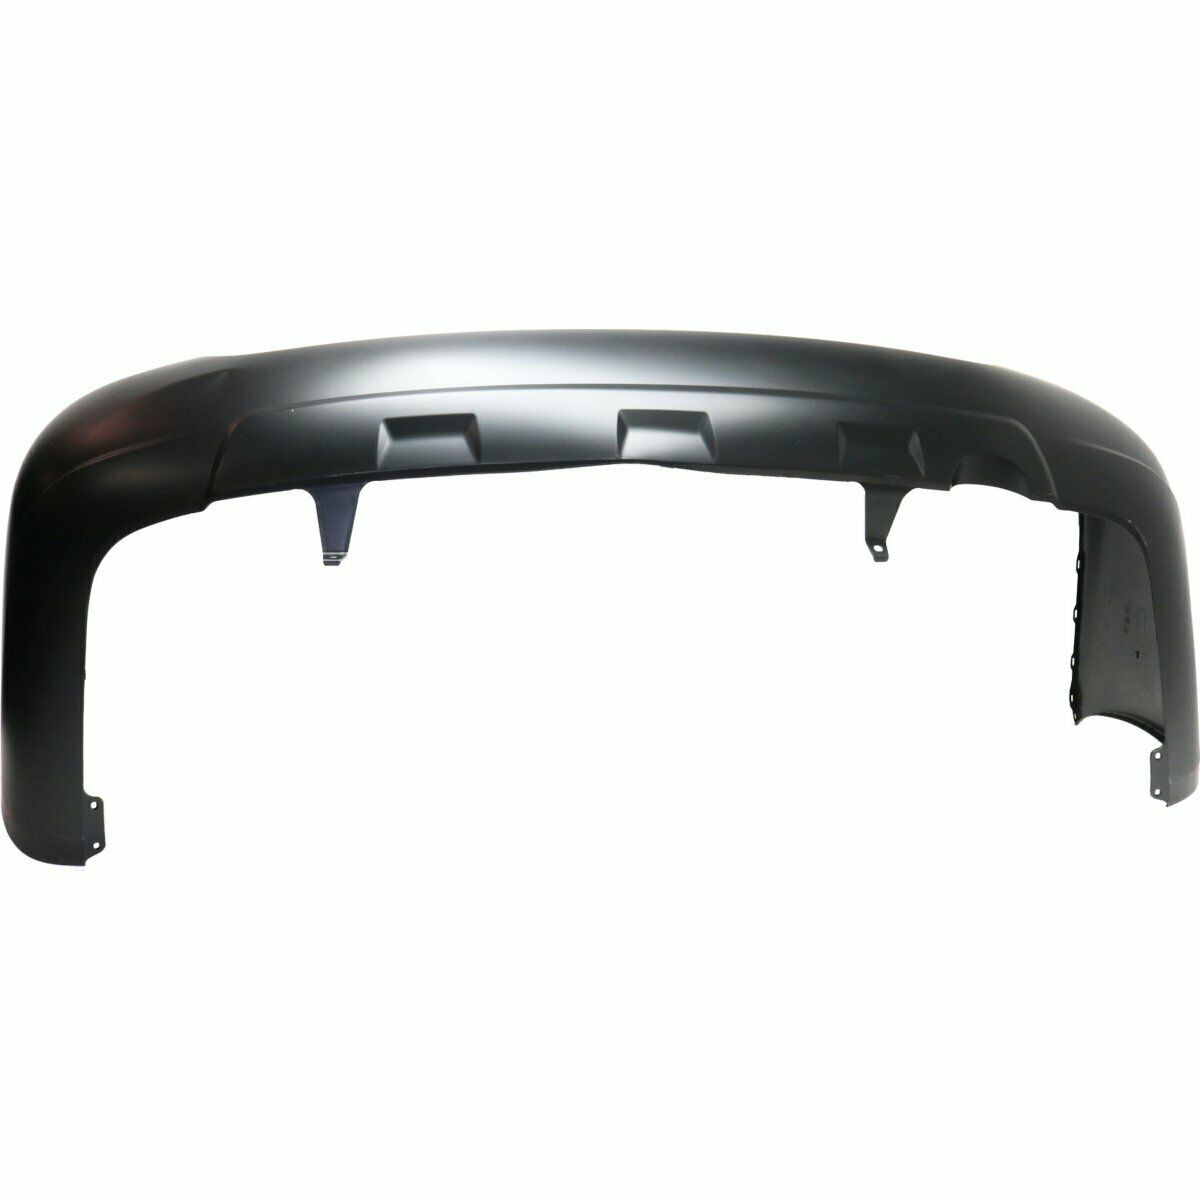 2004-2007 Toyota Highlander Rear Bumper Painted to Match